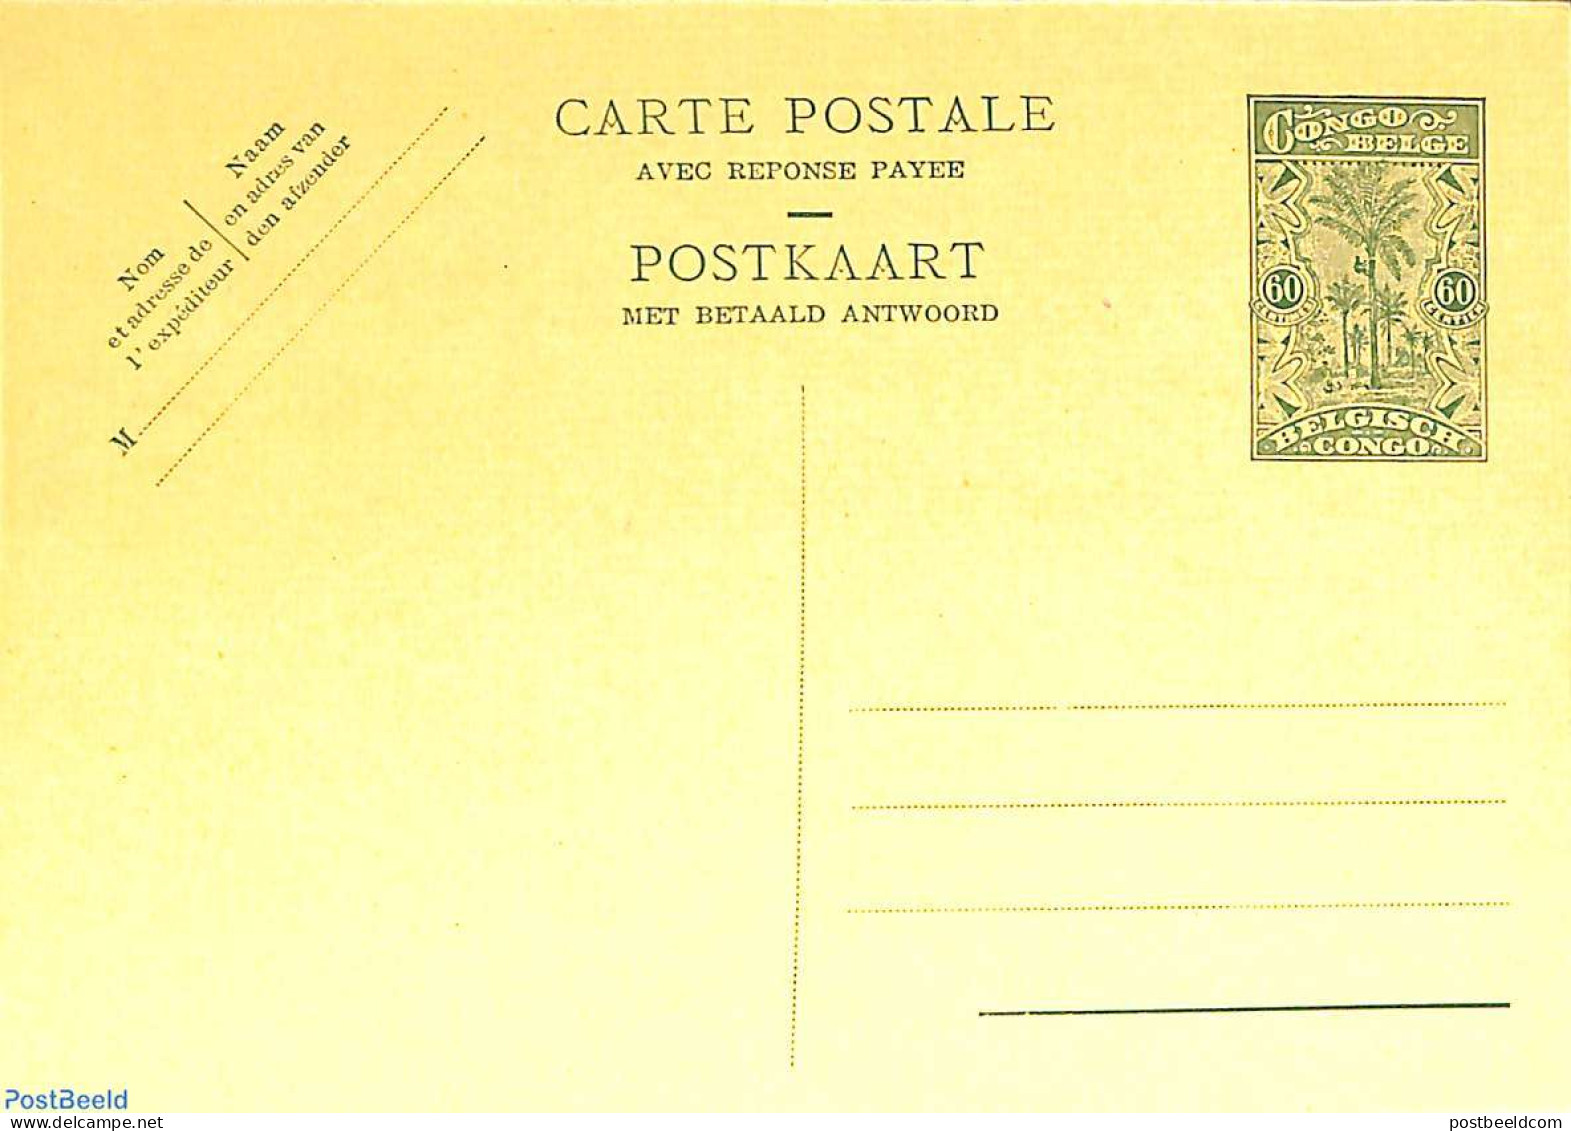 Congo Belgium 1932 Reply Paid Postcard 60/60c, Unused Postal Stationary, Nature - Trees & Forests - Rotary, Lions Club